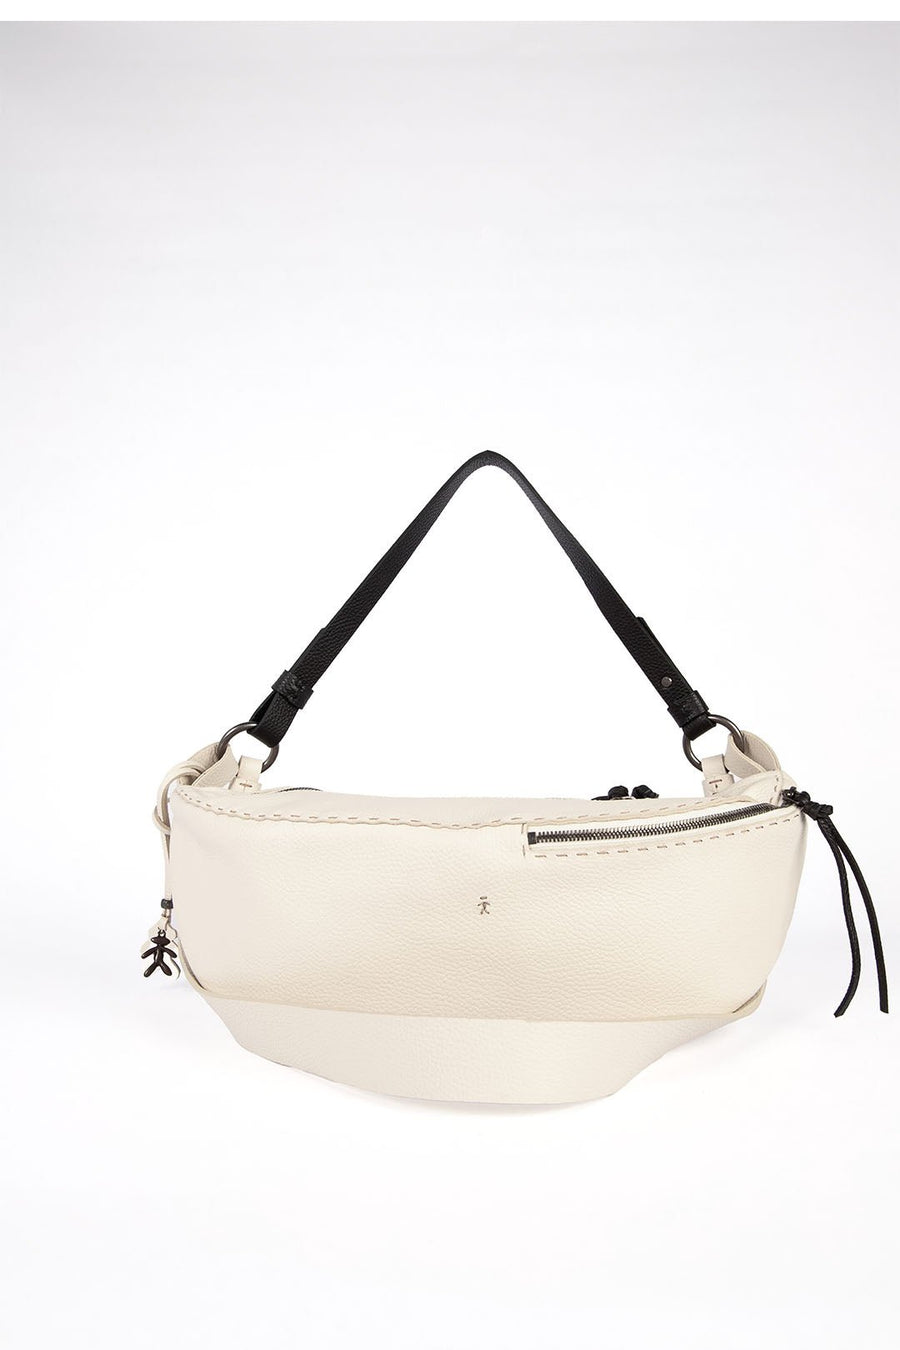 HENRY BEGUELIN CHEST BAG, WHITE - Burning Torch Online Boutique